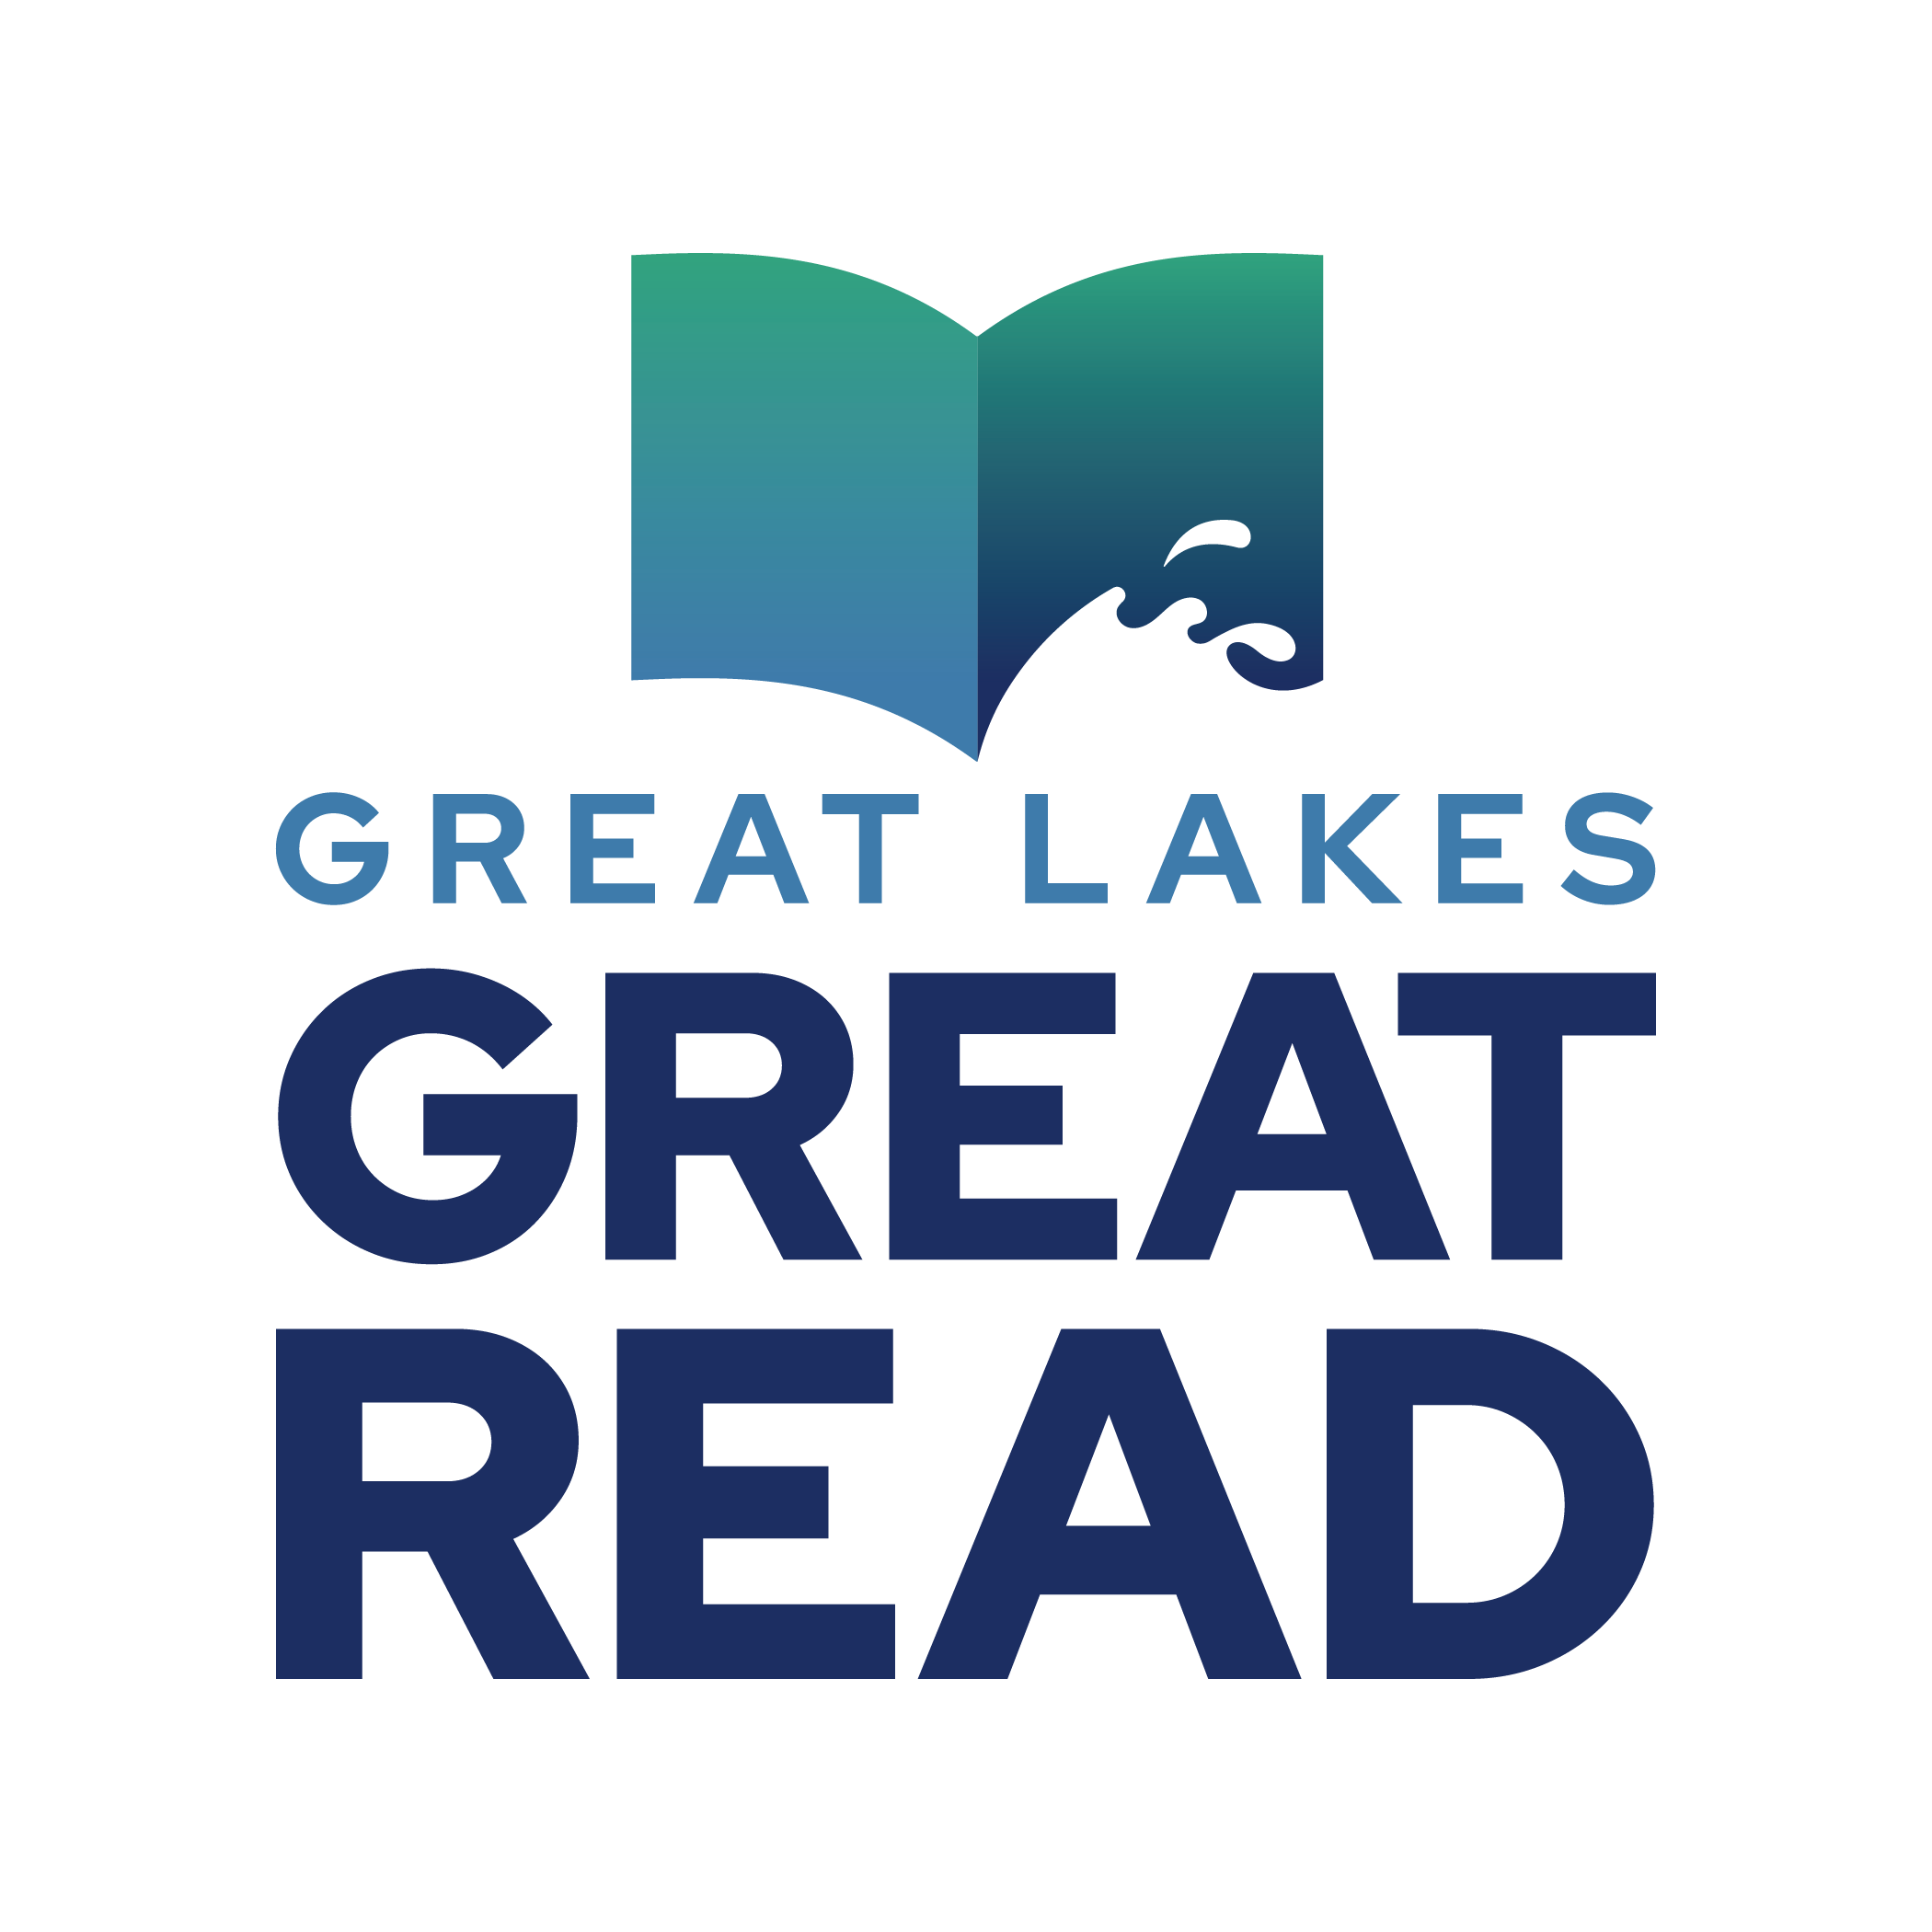 Image of a book with a wave on the cover that says "Great Lakes, Great Read"